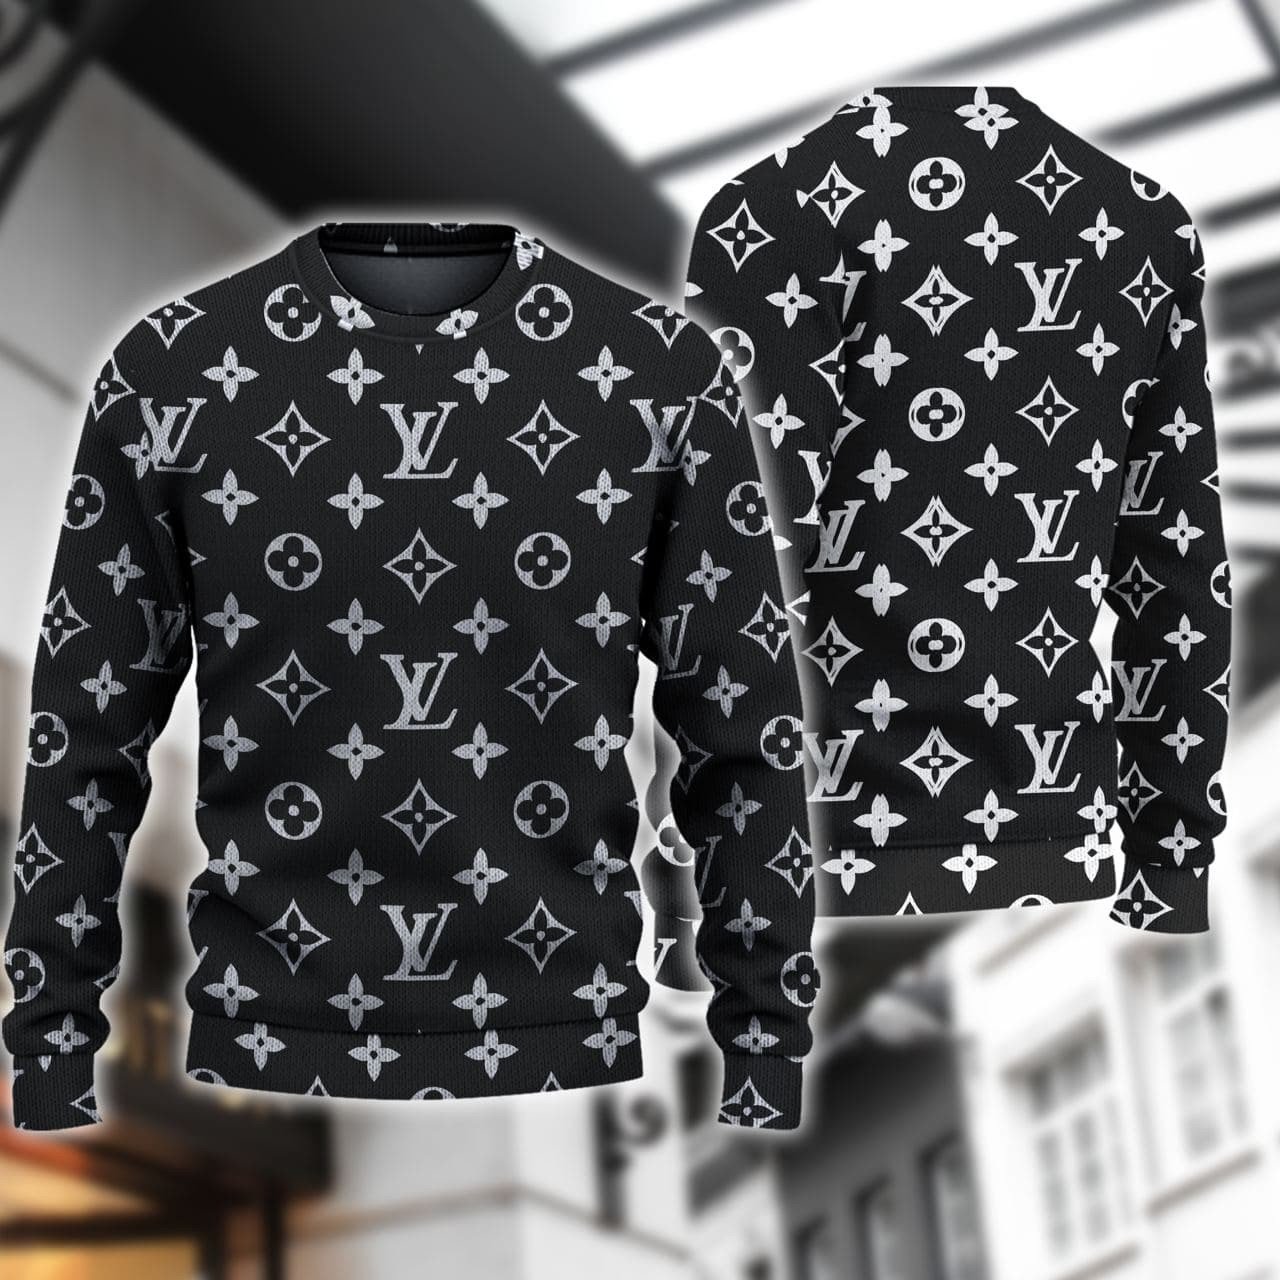 BEST Louis Vuitton black pattern ugly Christmas sweater 2